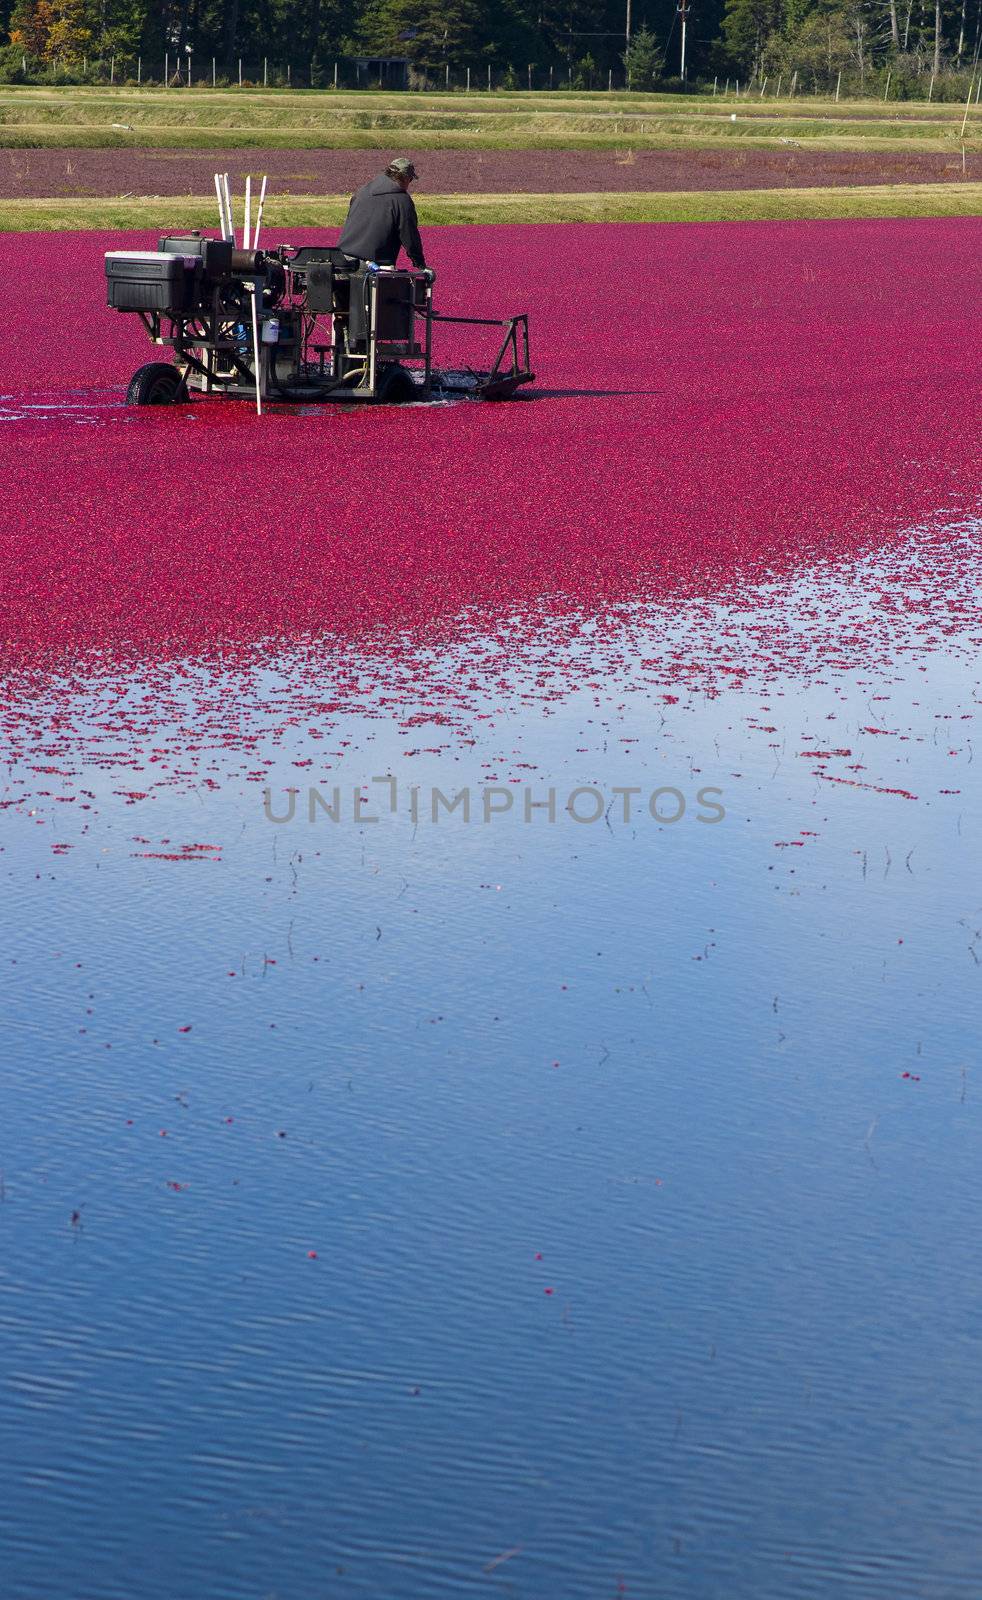 A Farmer of Cranberries cultivates his crop right before harvest